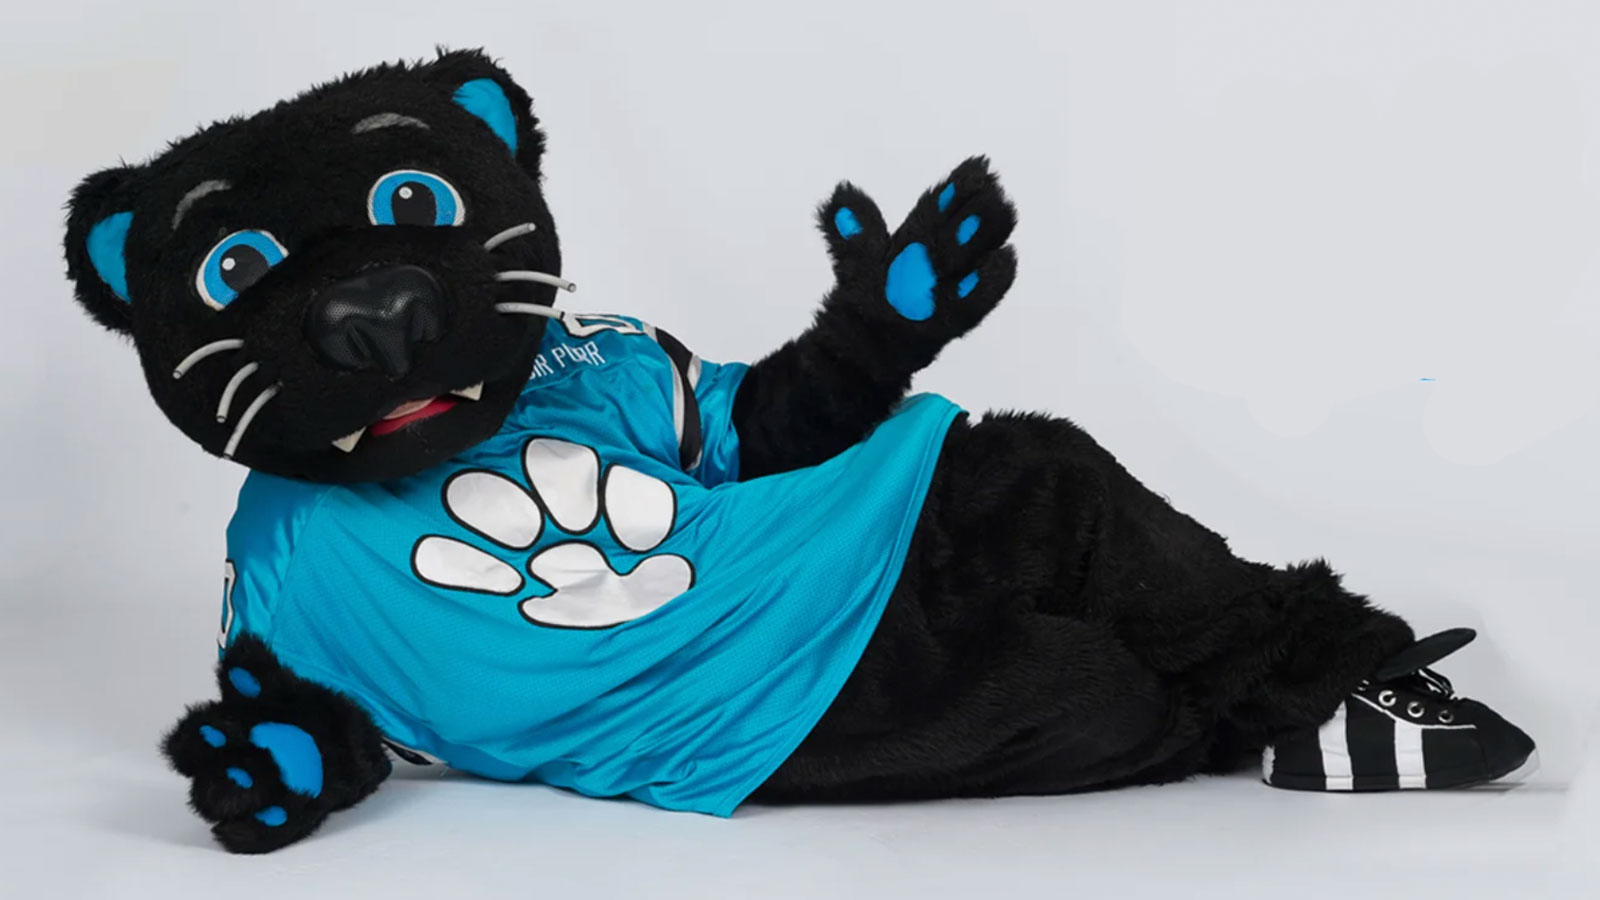 Carolina Panthers Mascot - Who is Sir Purr?